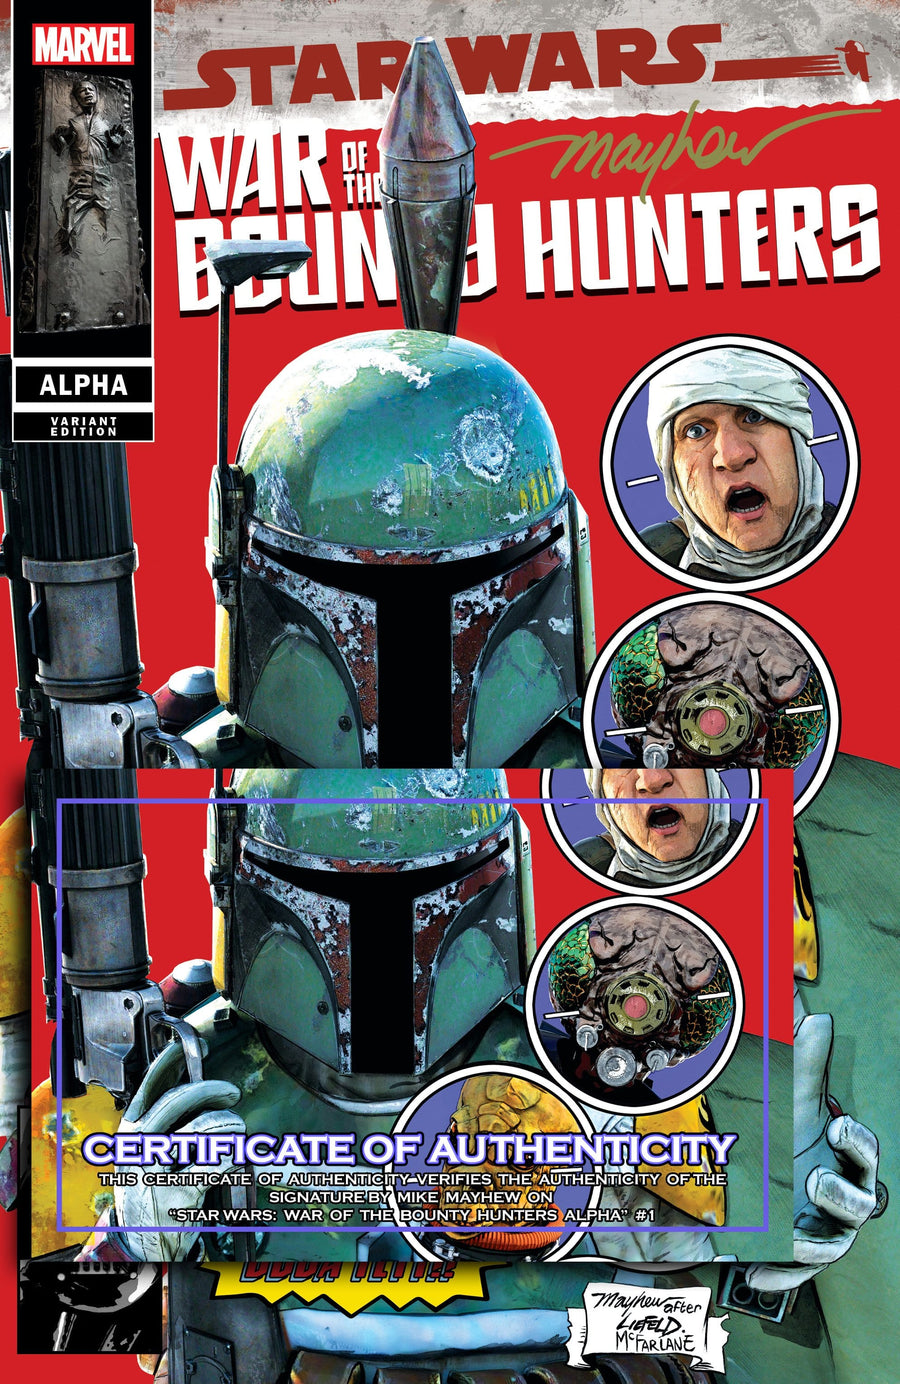 STAR WARS: WAR OF THE BOUNTY HUNTERS ALPHA #1 MIKE MAYHEW STUDIO VARIANT COVER TRADE DRESS SIGNED WITH COA